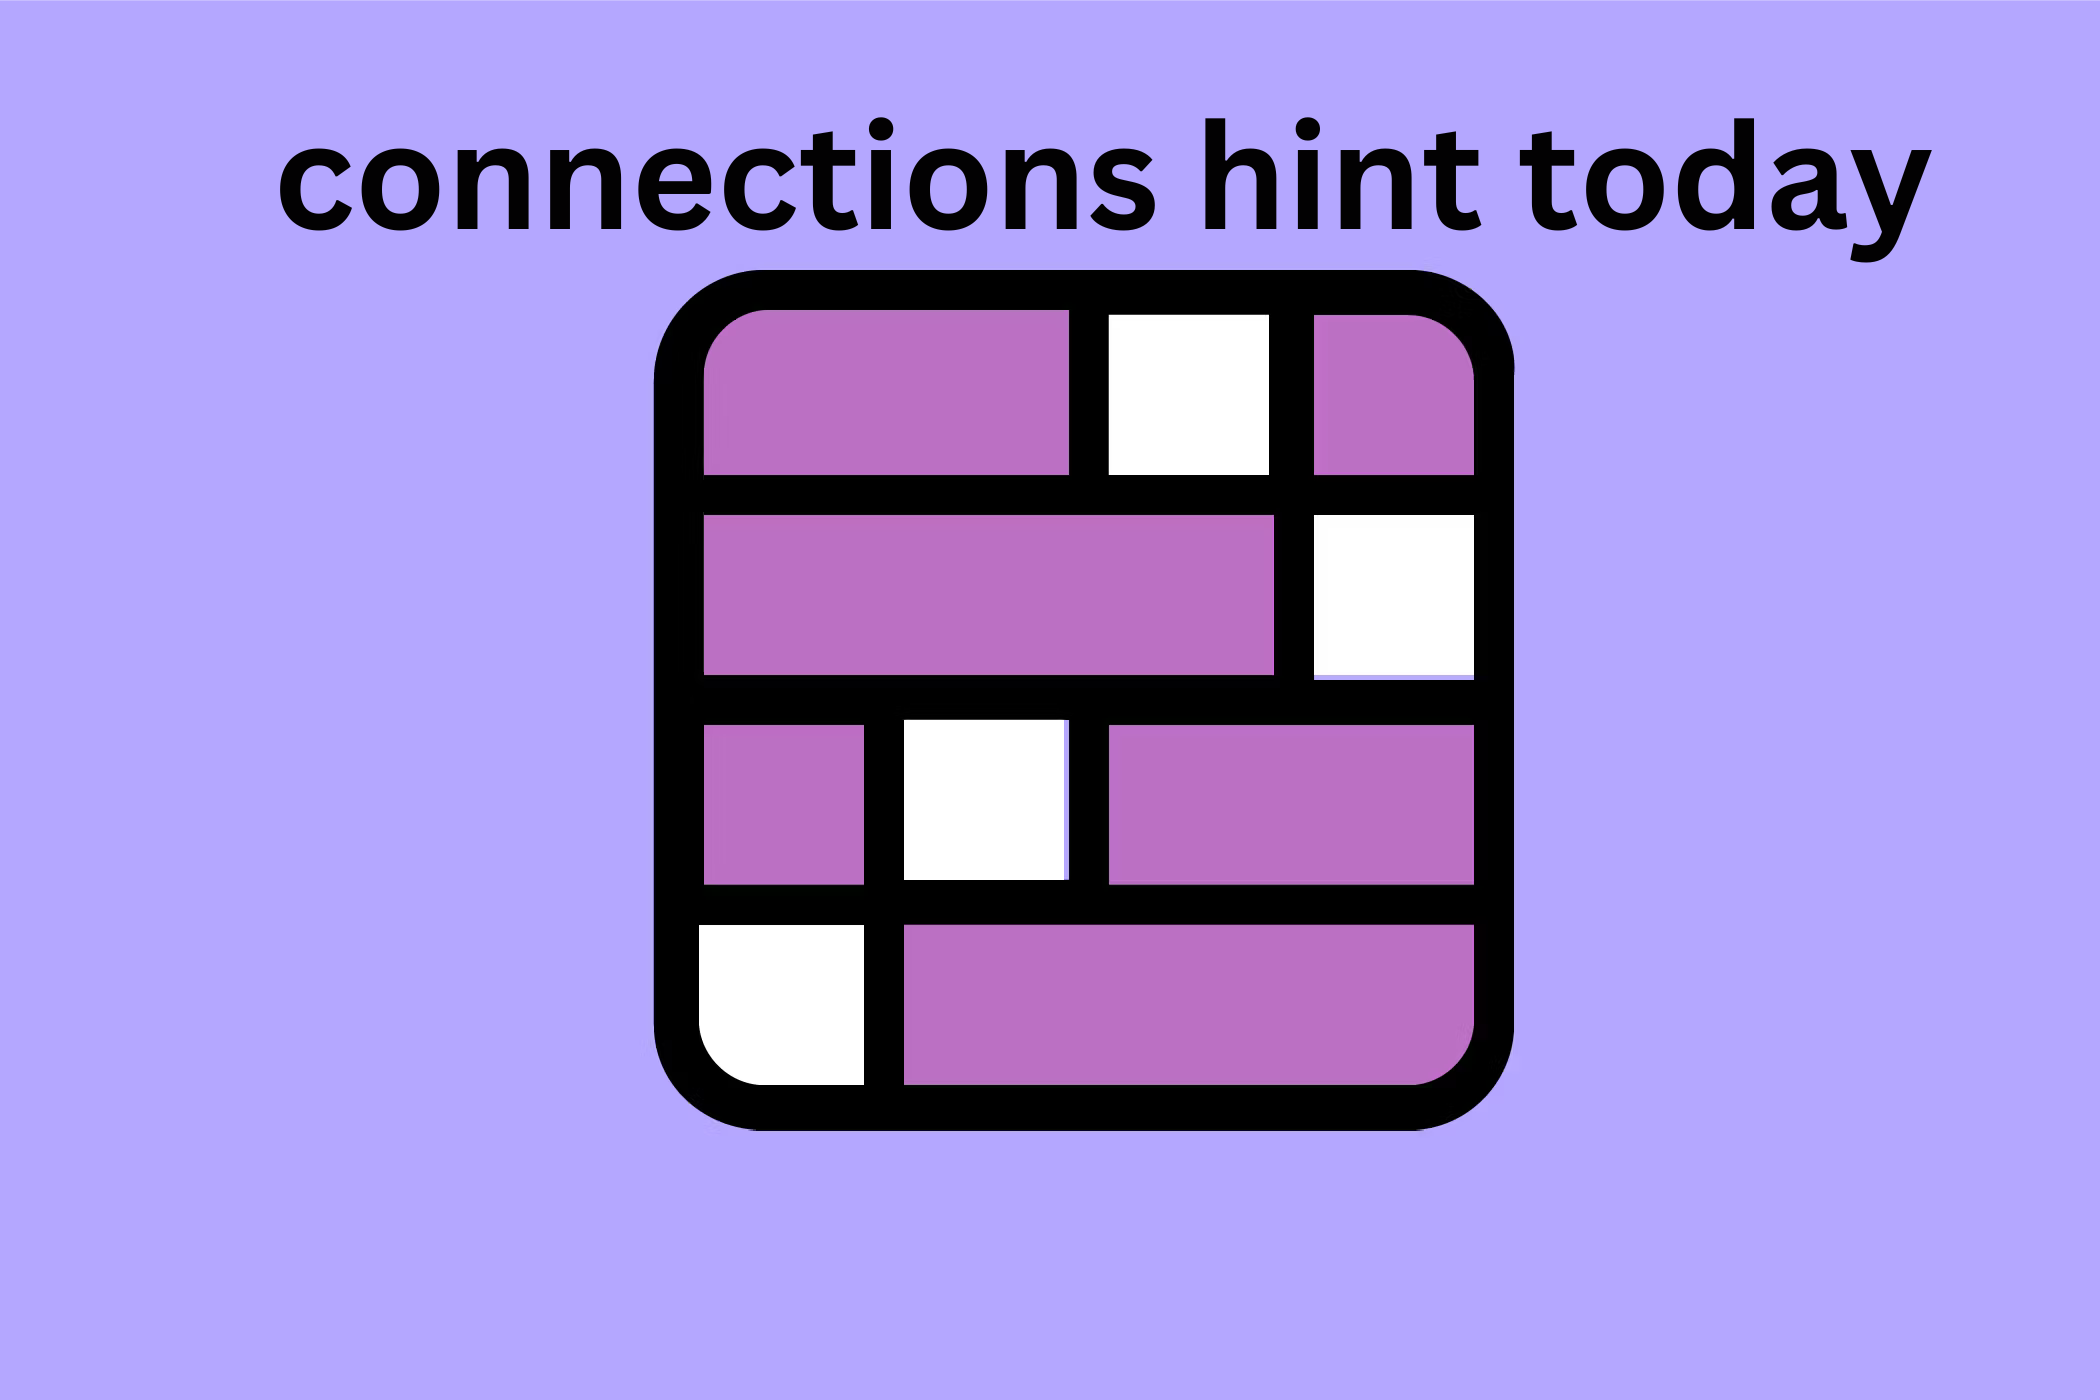 connections hint today